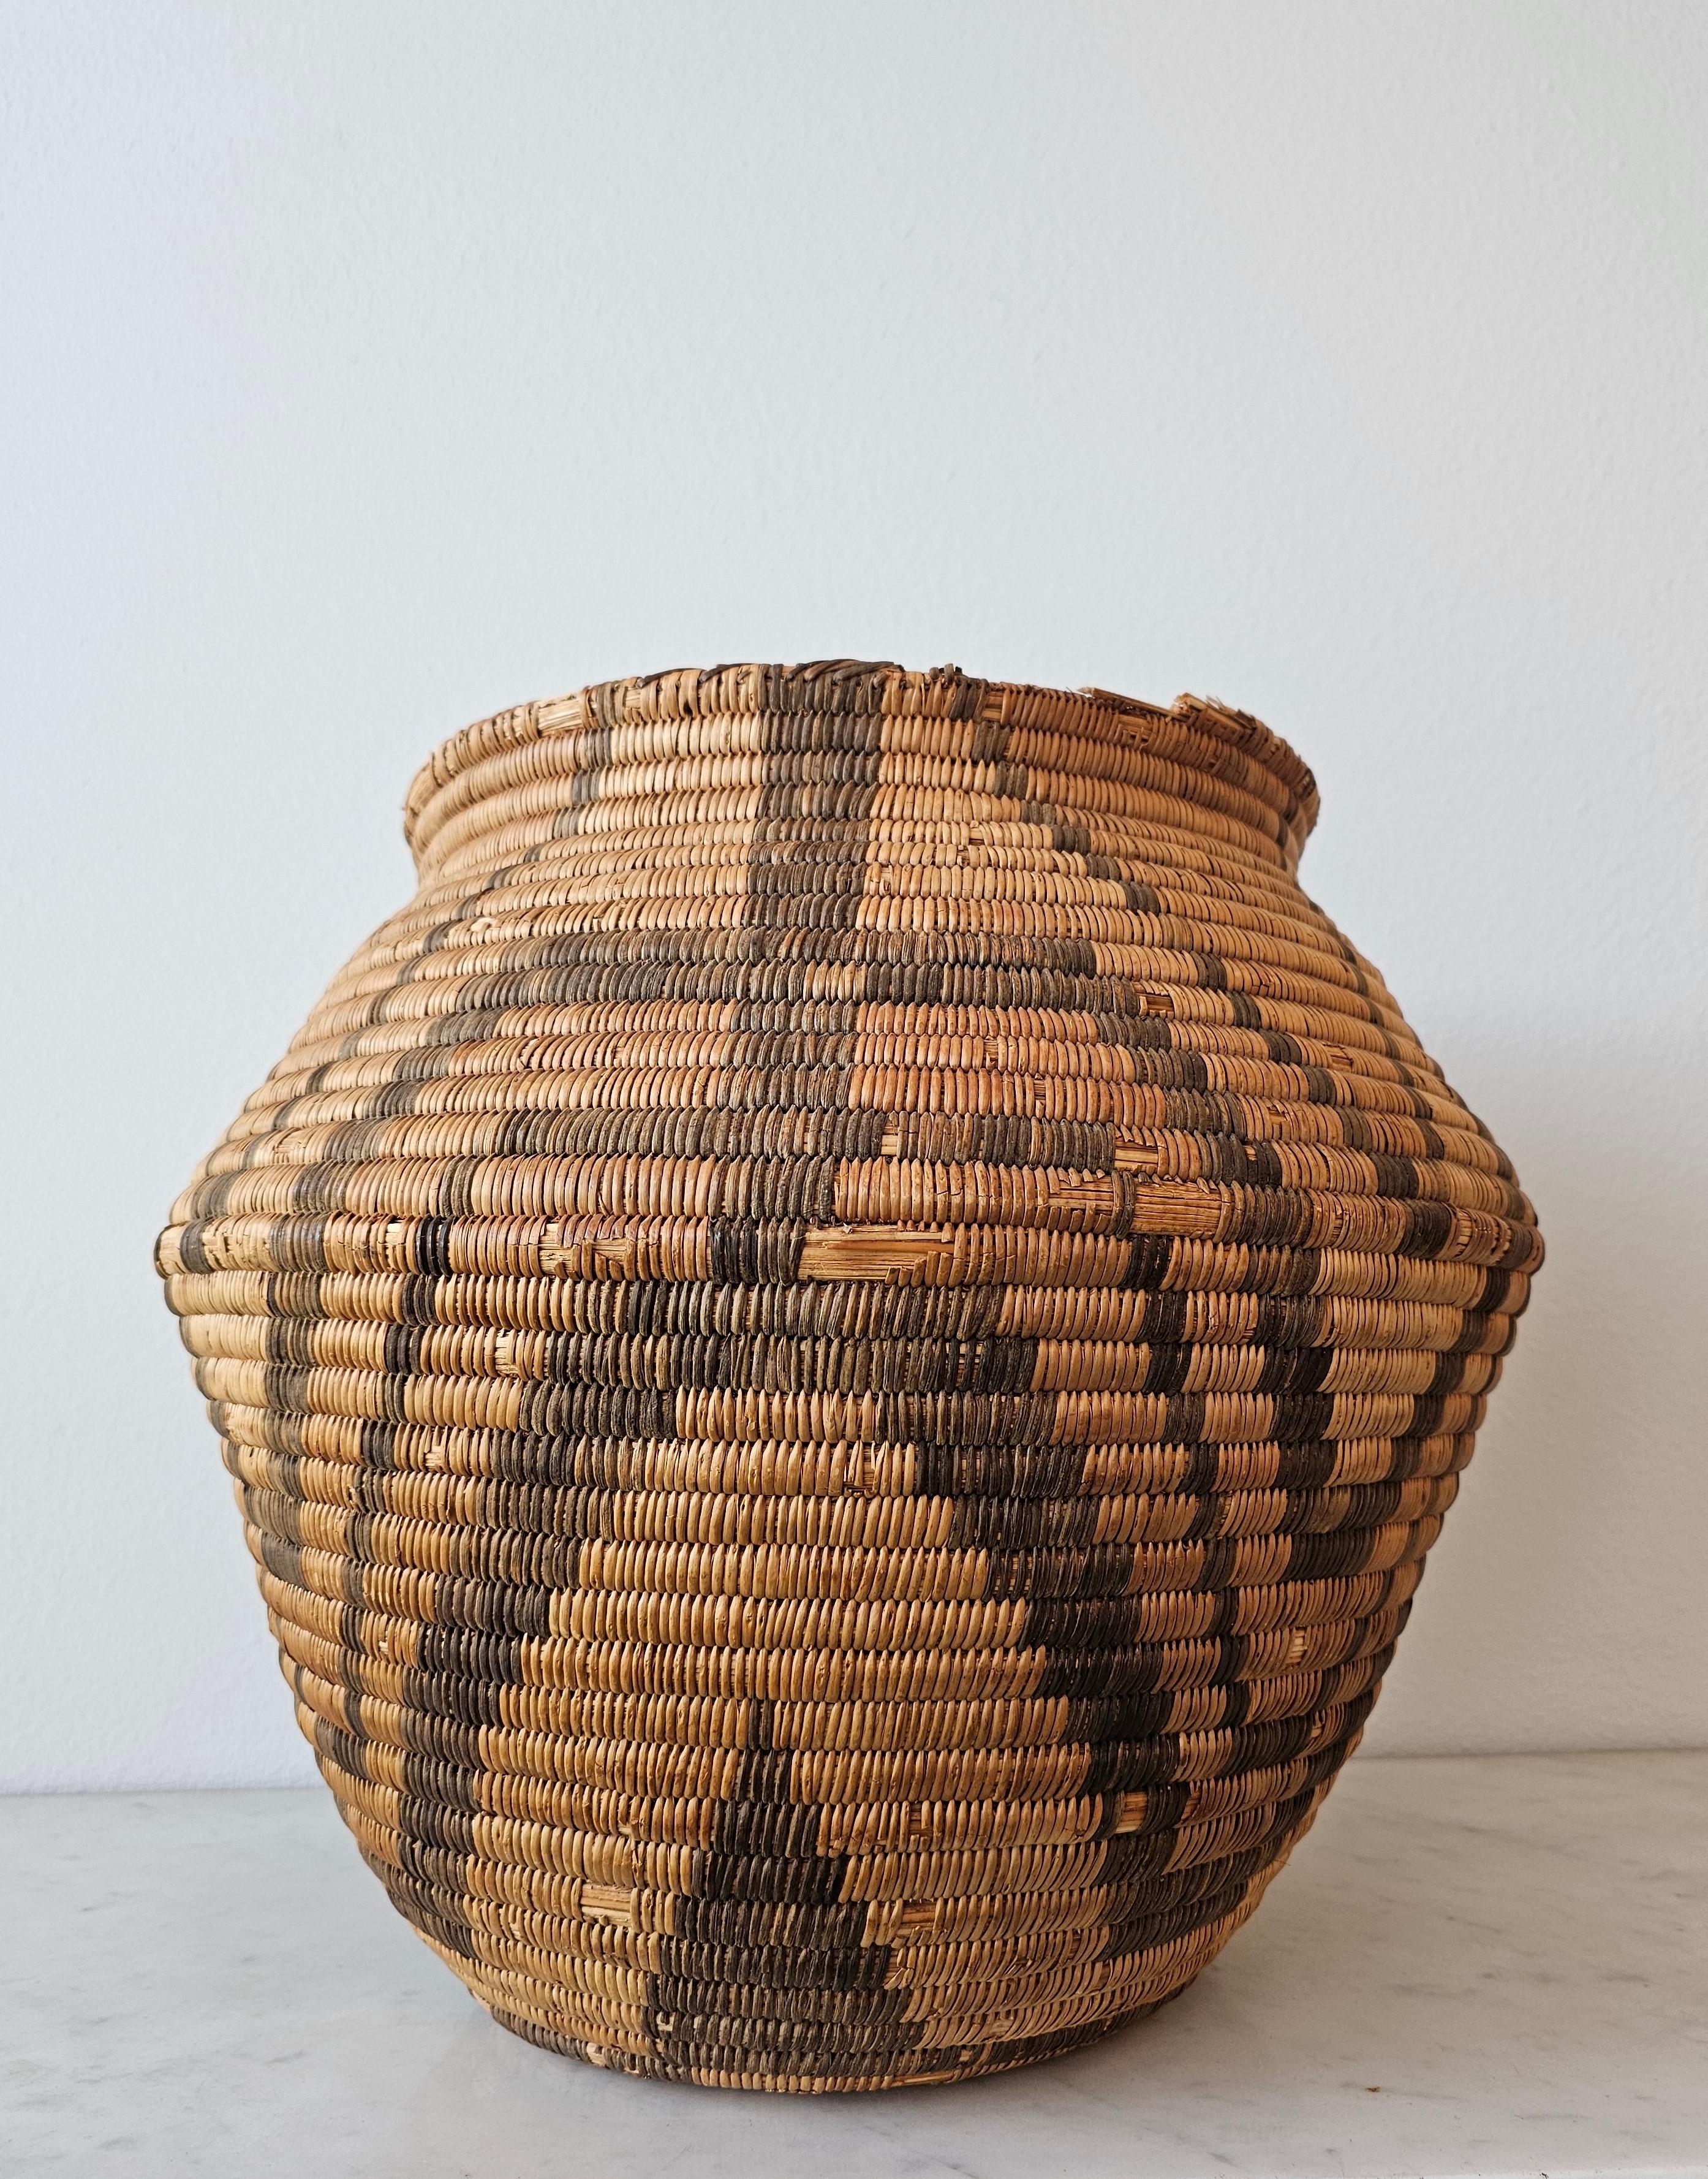 20th Century Antique Apache Olla Jar Coiled Willow Wicker Devil's Claw Basket  For Sale